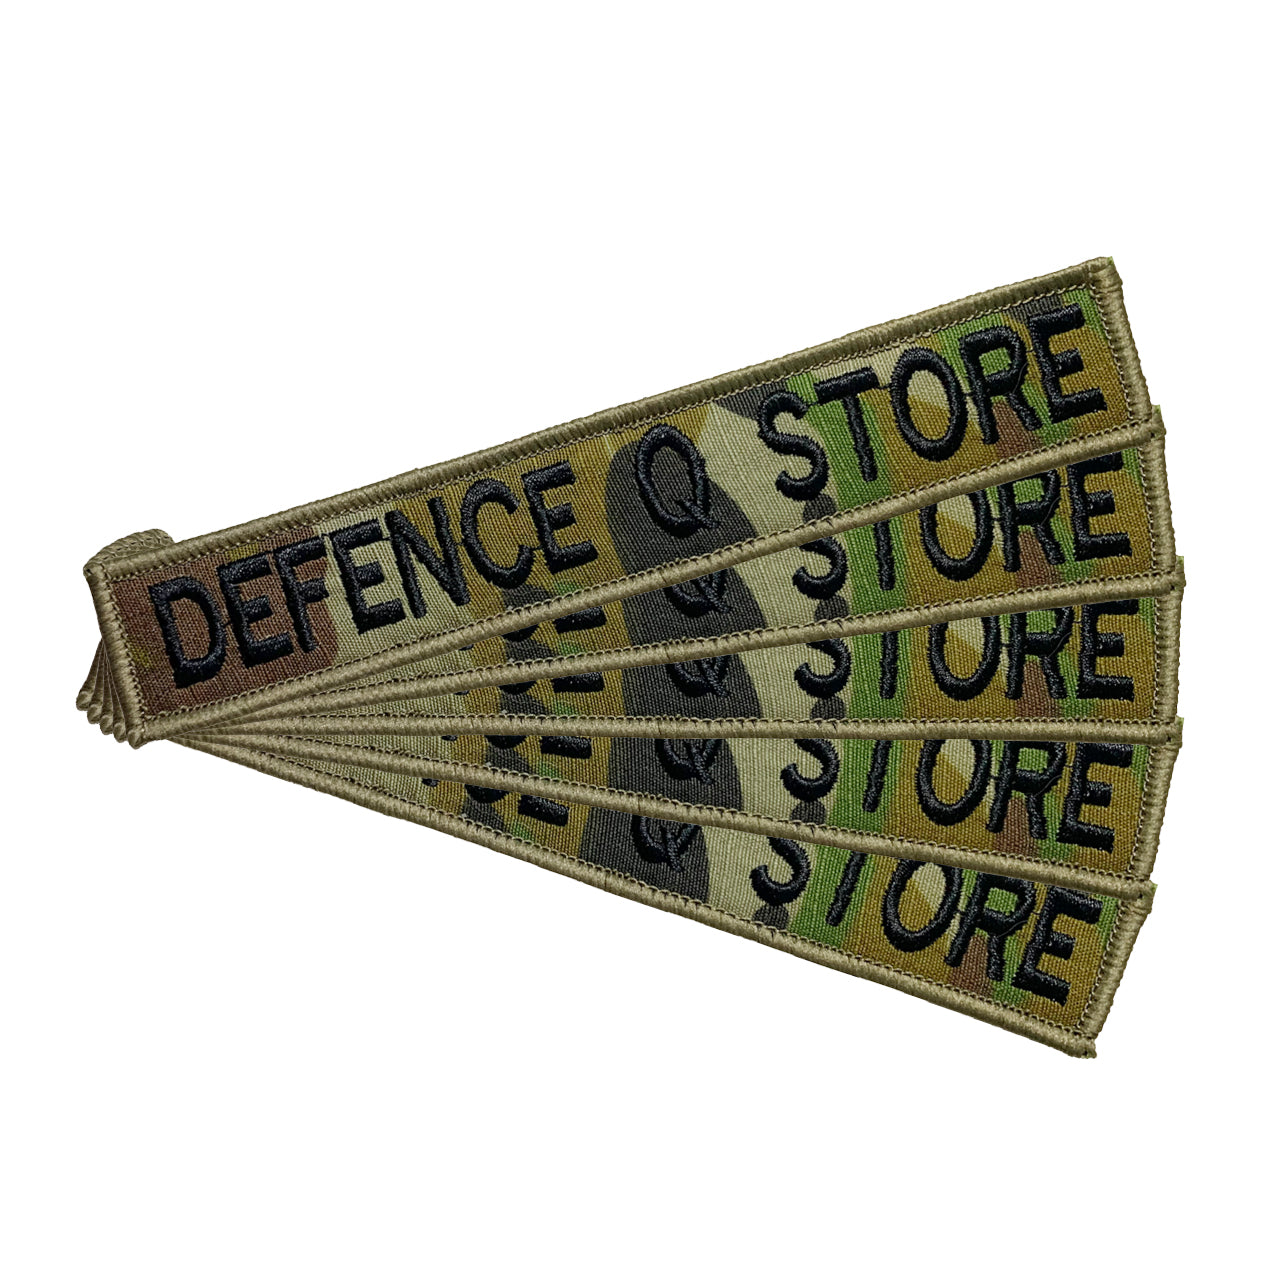 Name tag in AMC material, size is 2.5cm x 15cm, lettering is 1.5cm in height.  All embroidery is done in upper case letters only as a FYI.  These are great for cadets.  Don't forget you can even add the velcro backing and use them on your field gear or even dog vests.  Made on the Gold Coast, please support Australian made www.defenceqstore.com.au